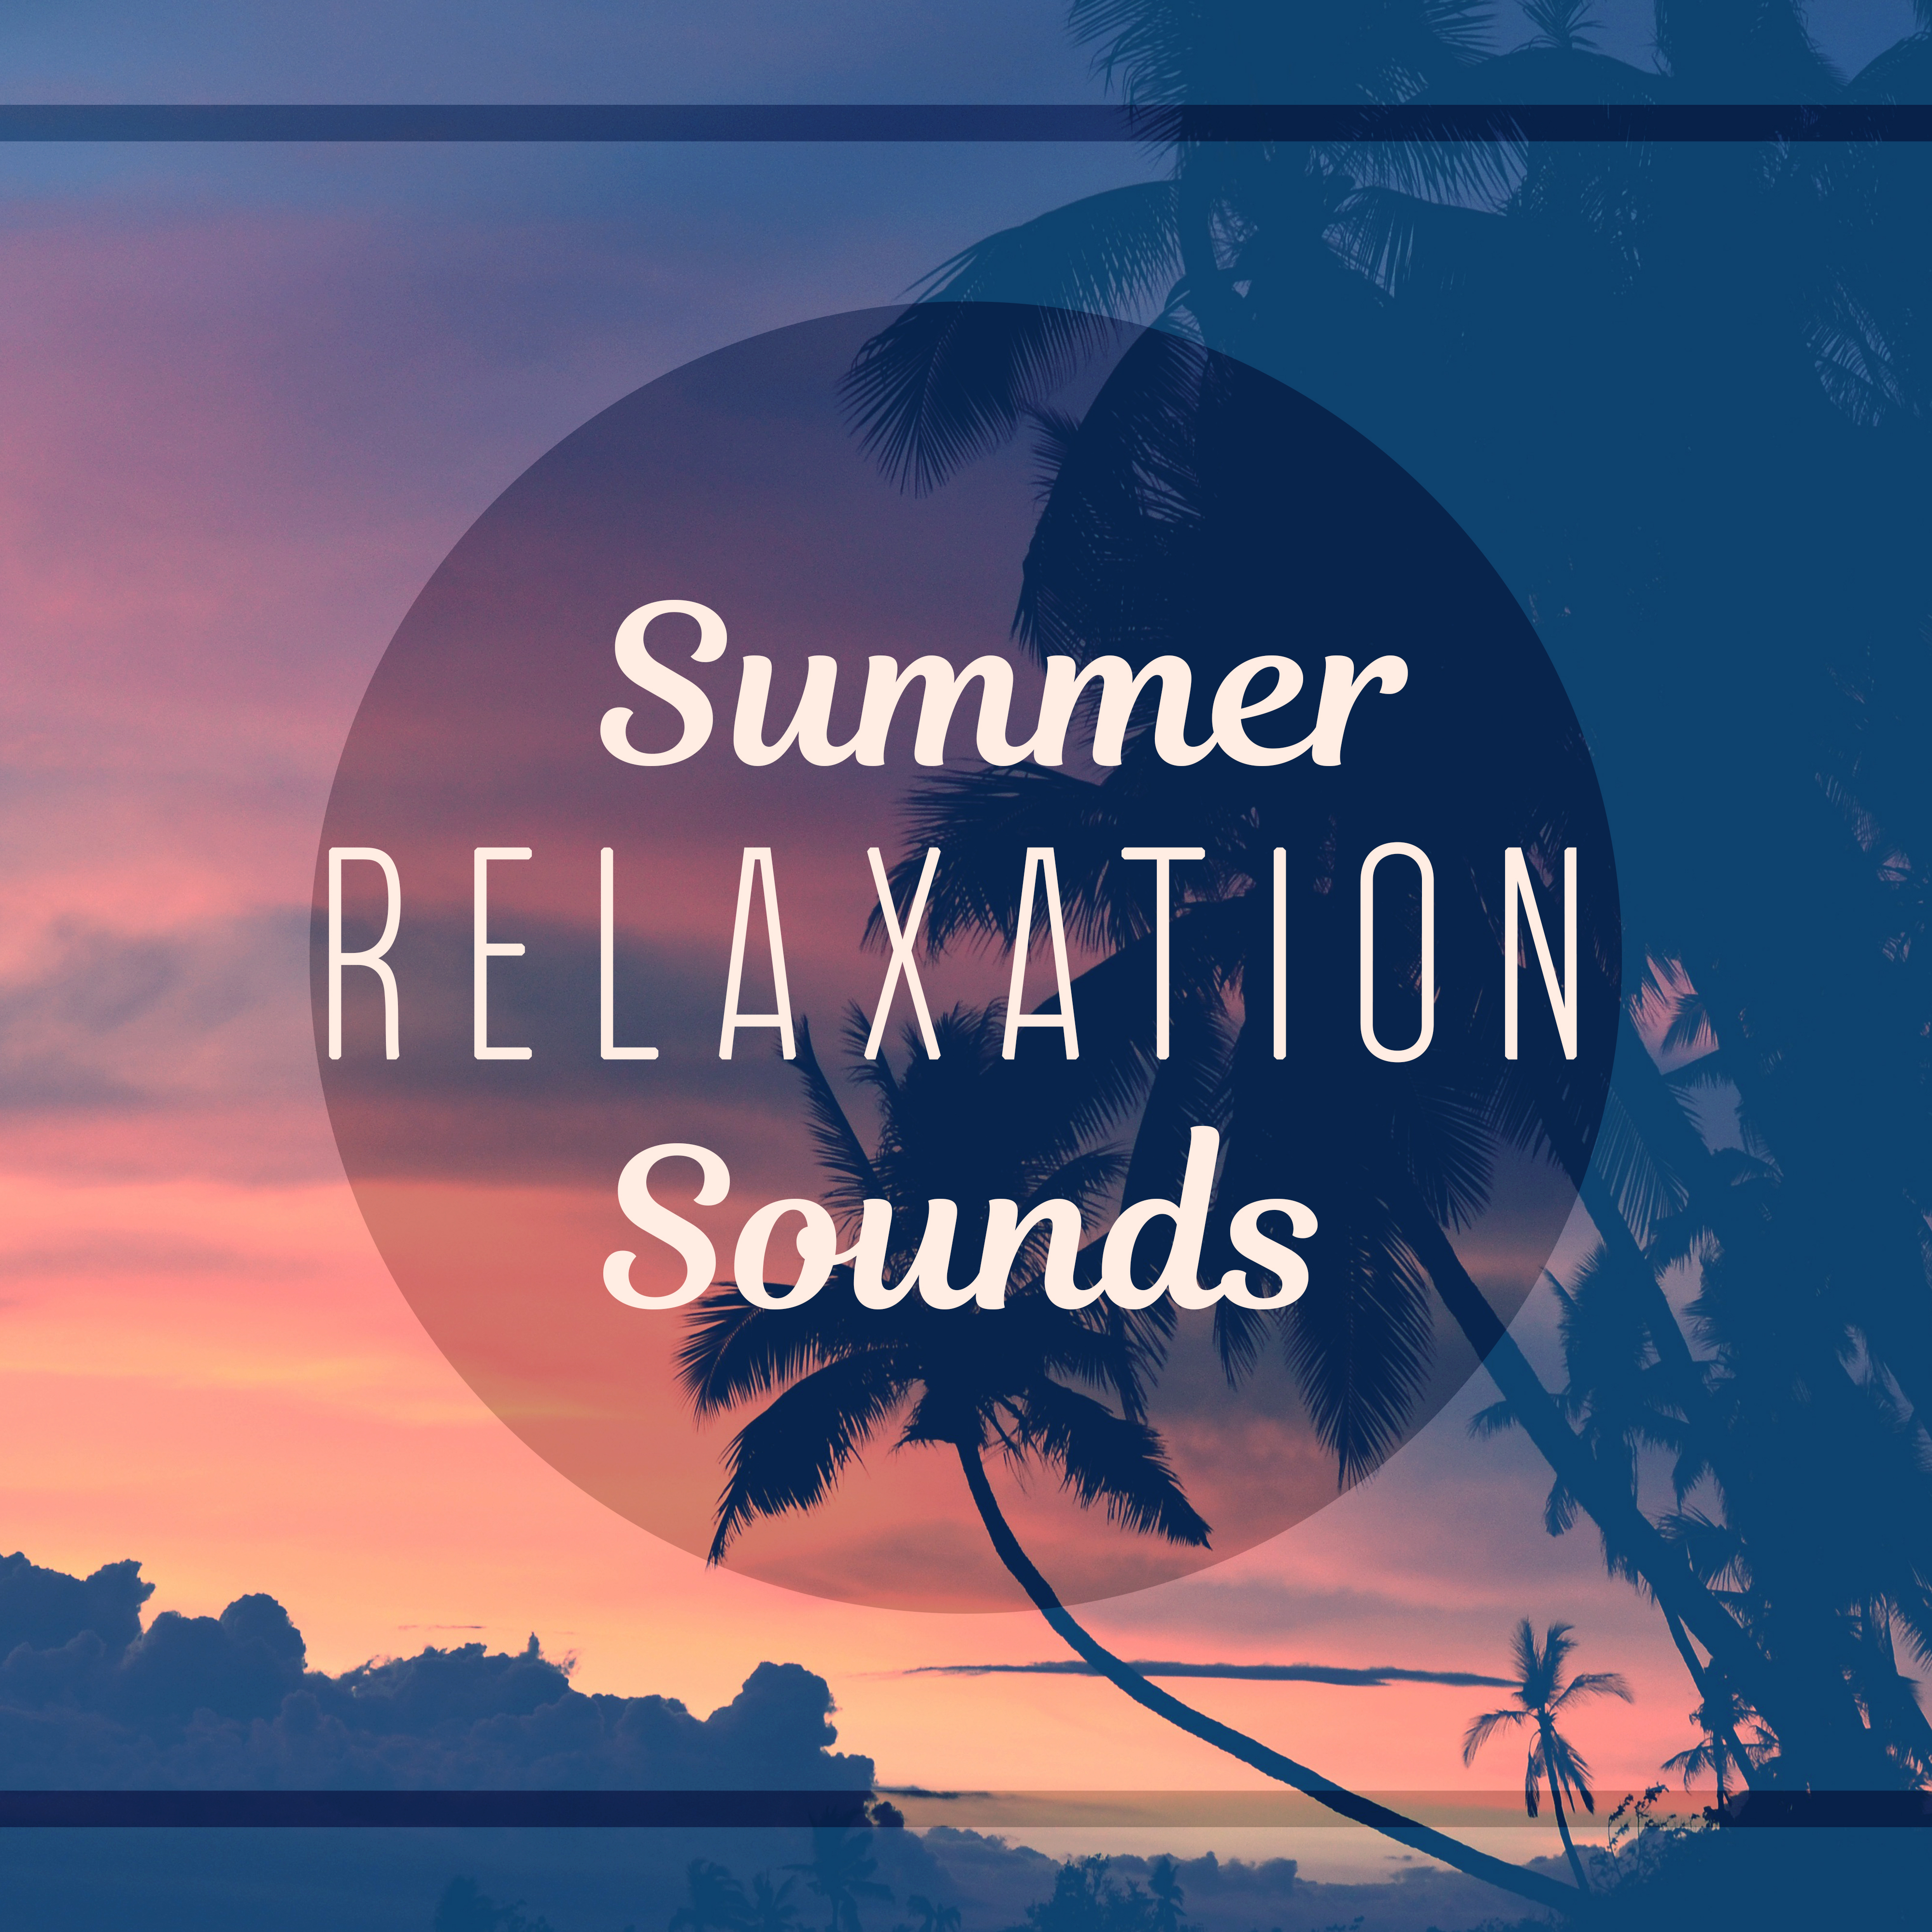 Summer Relaxation Sounds – Chill Out Music, Sounds to Relax, Calm Down with Chill Out, Beach Lounge